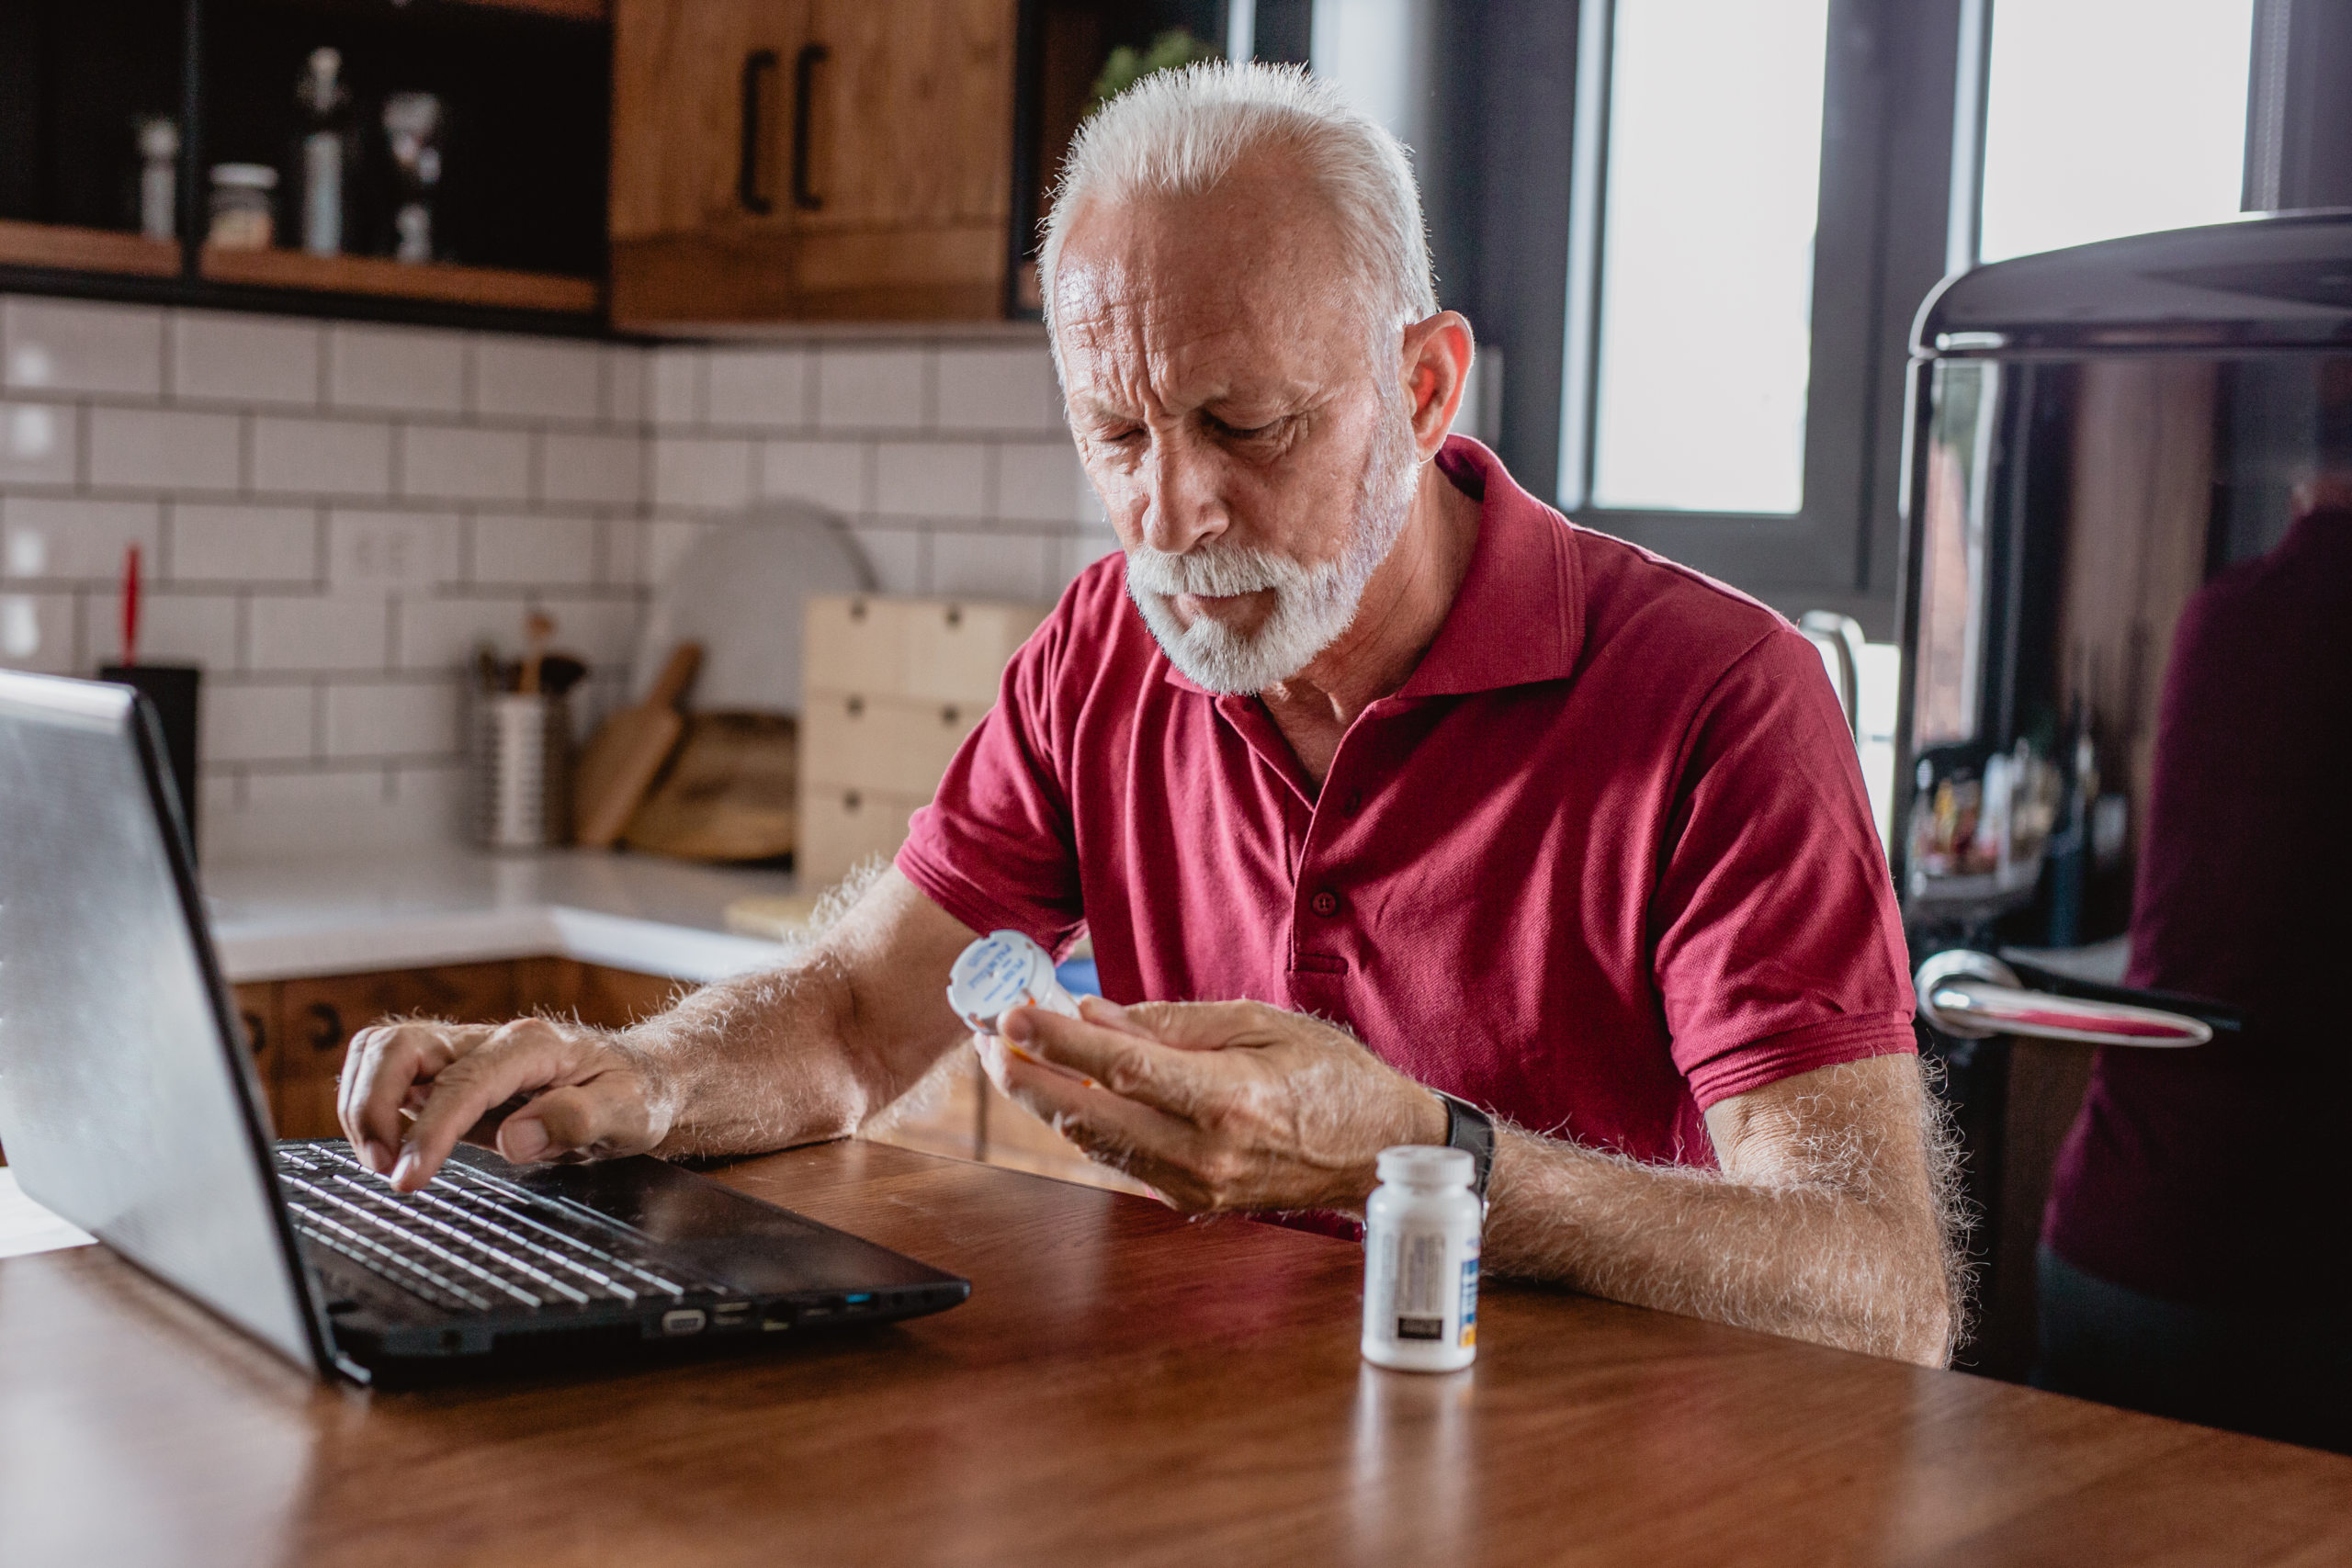 Older man researches online to identify a potential coronavirus scam regarding a fake treatment or vaccine for COVID-19